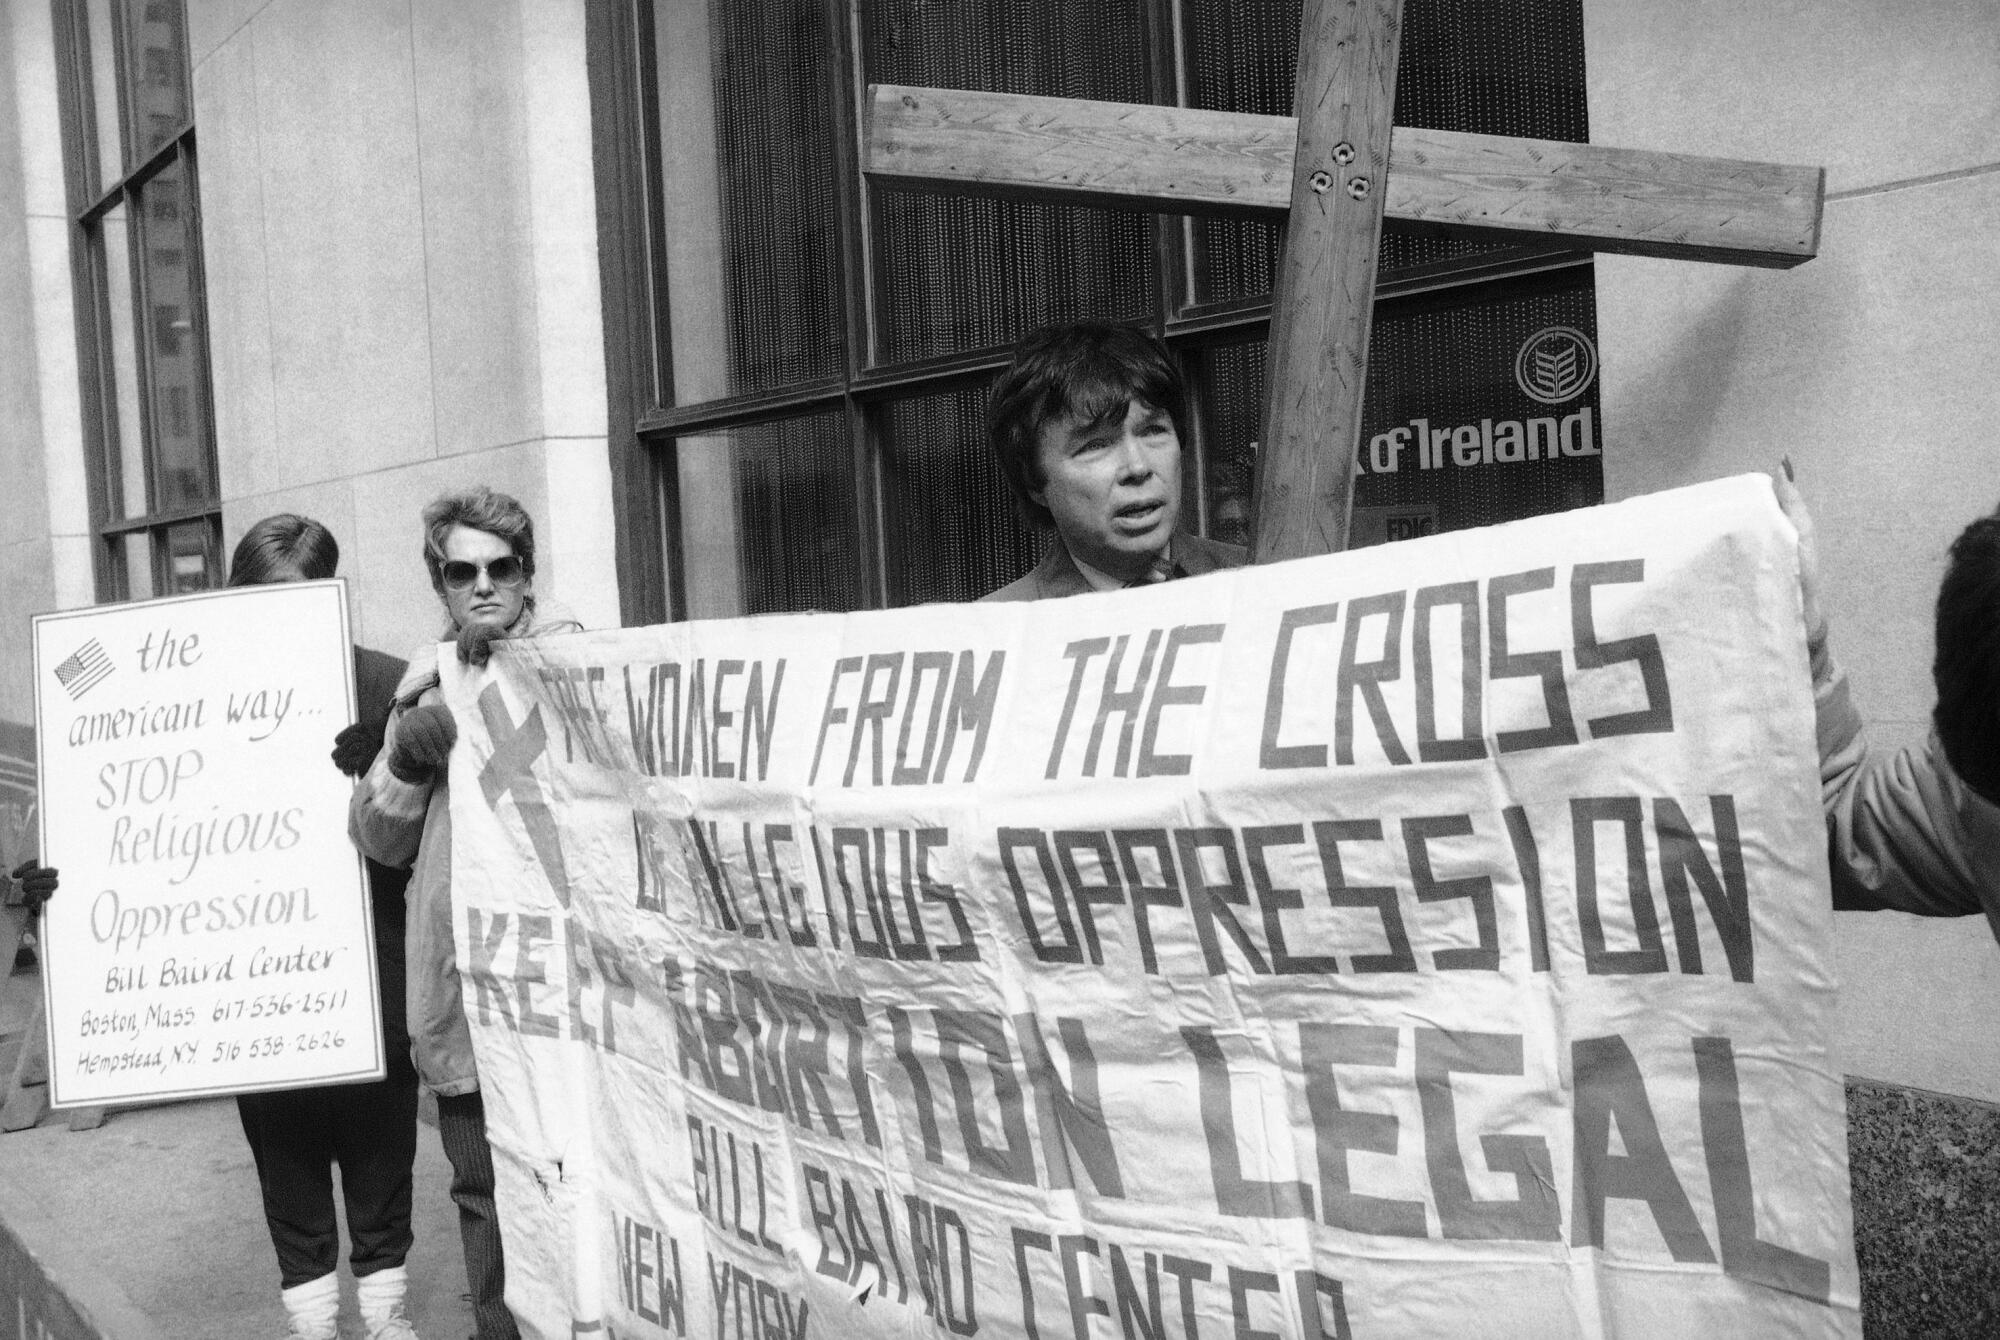 A man holds a big wooden cross and a banner.